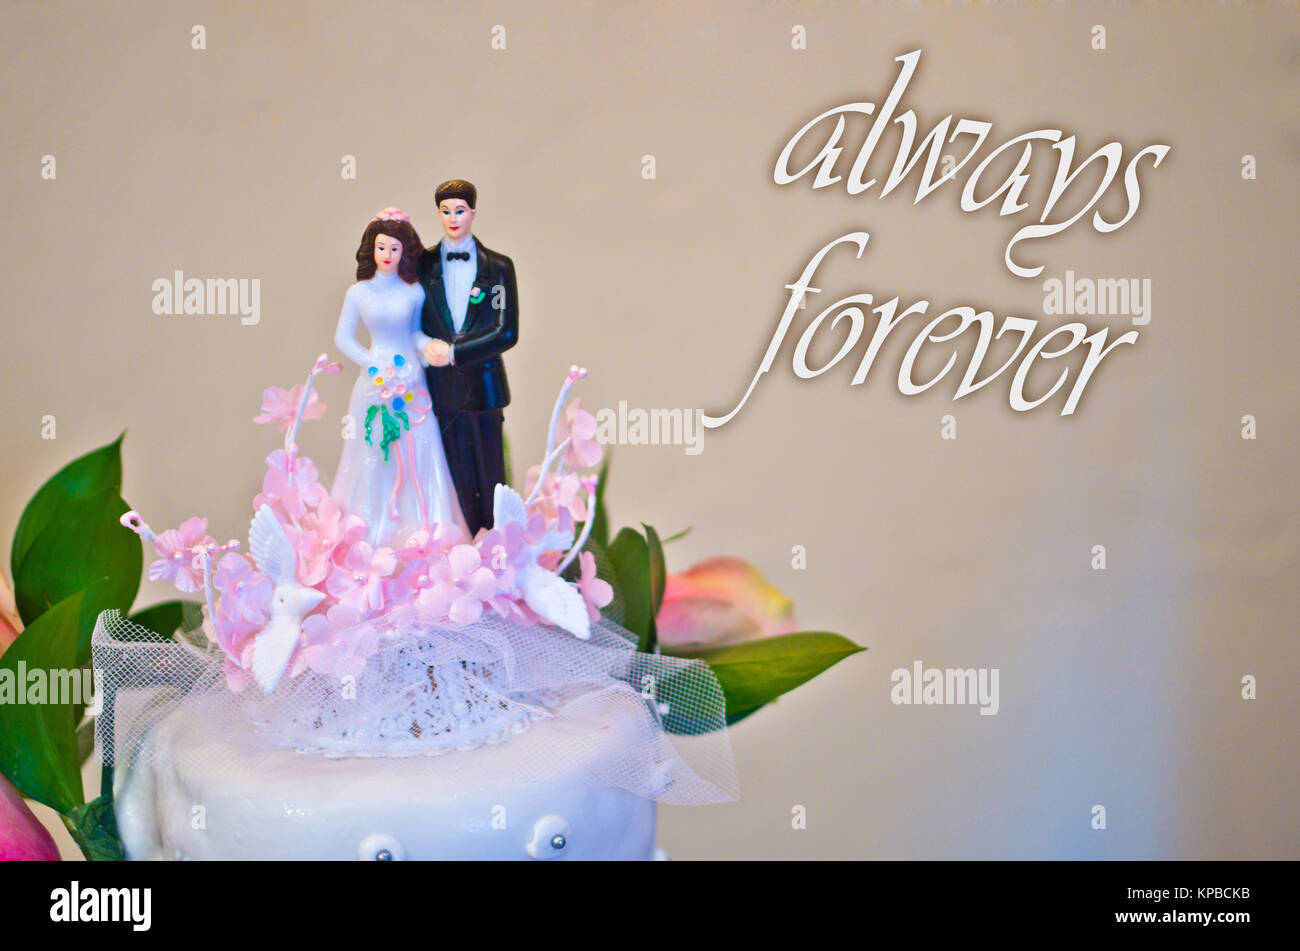 figurines of the bride and groom wedding cake wish all happiness to the newlyweds: always forever Stock Photo